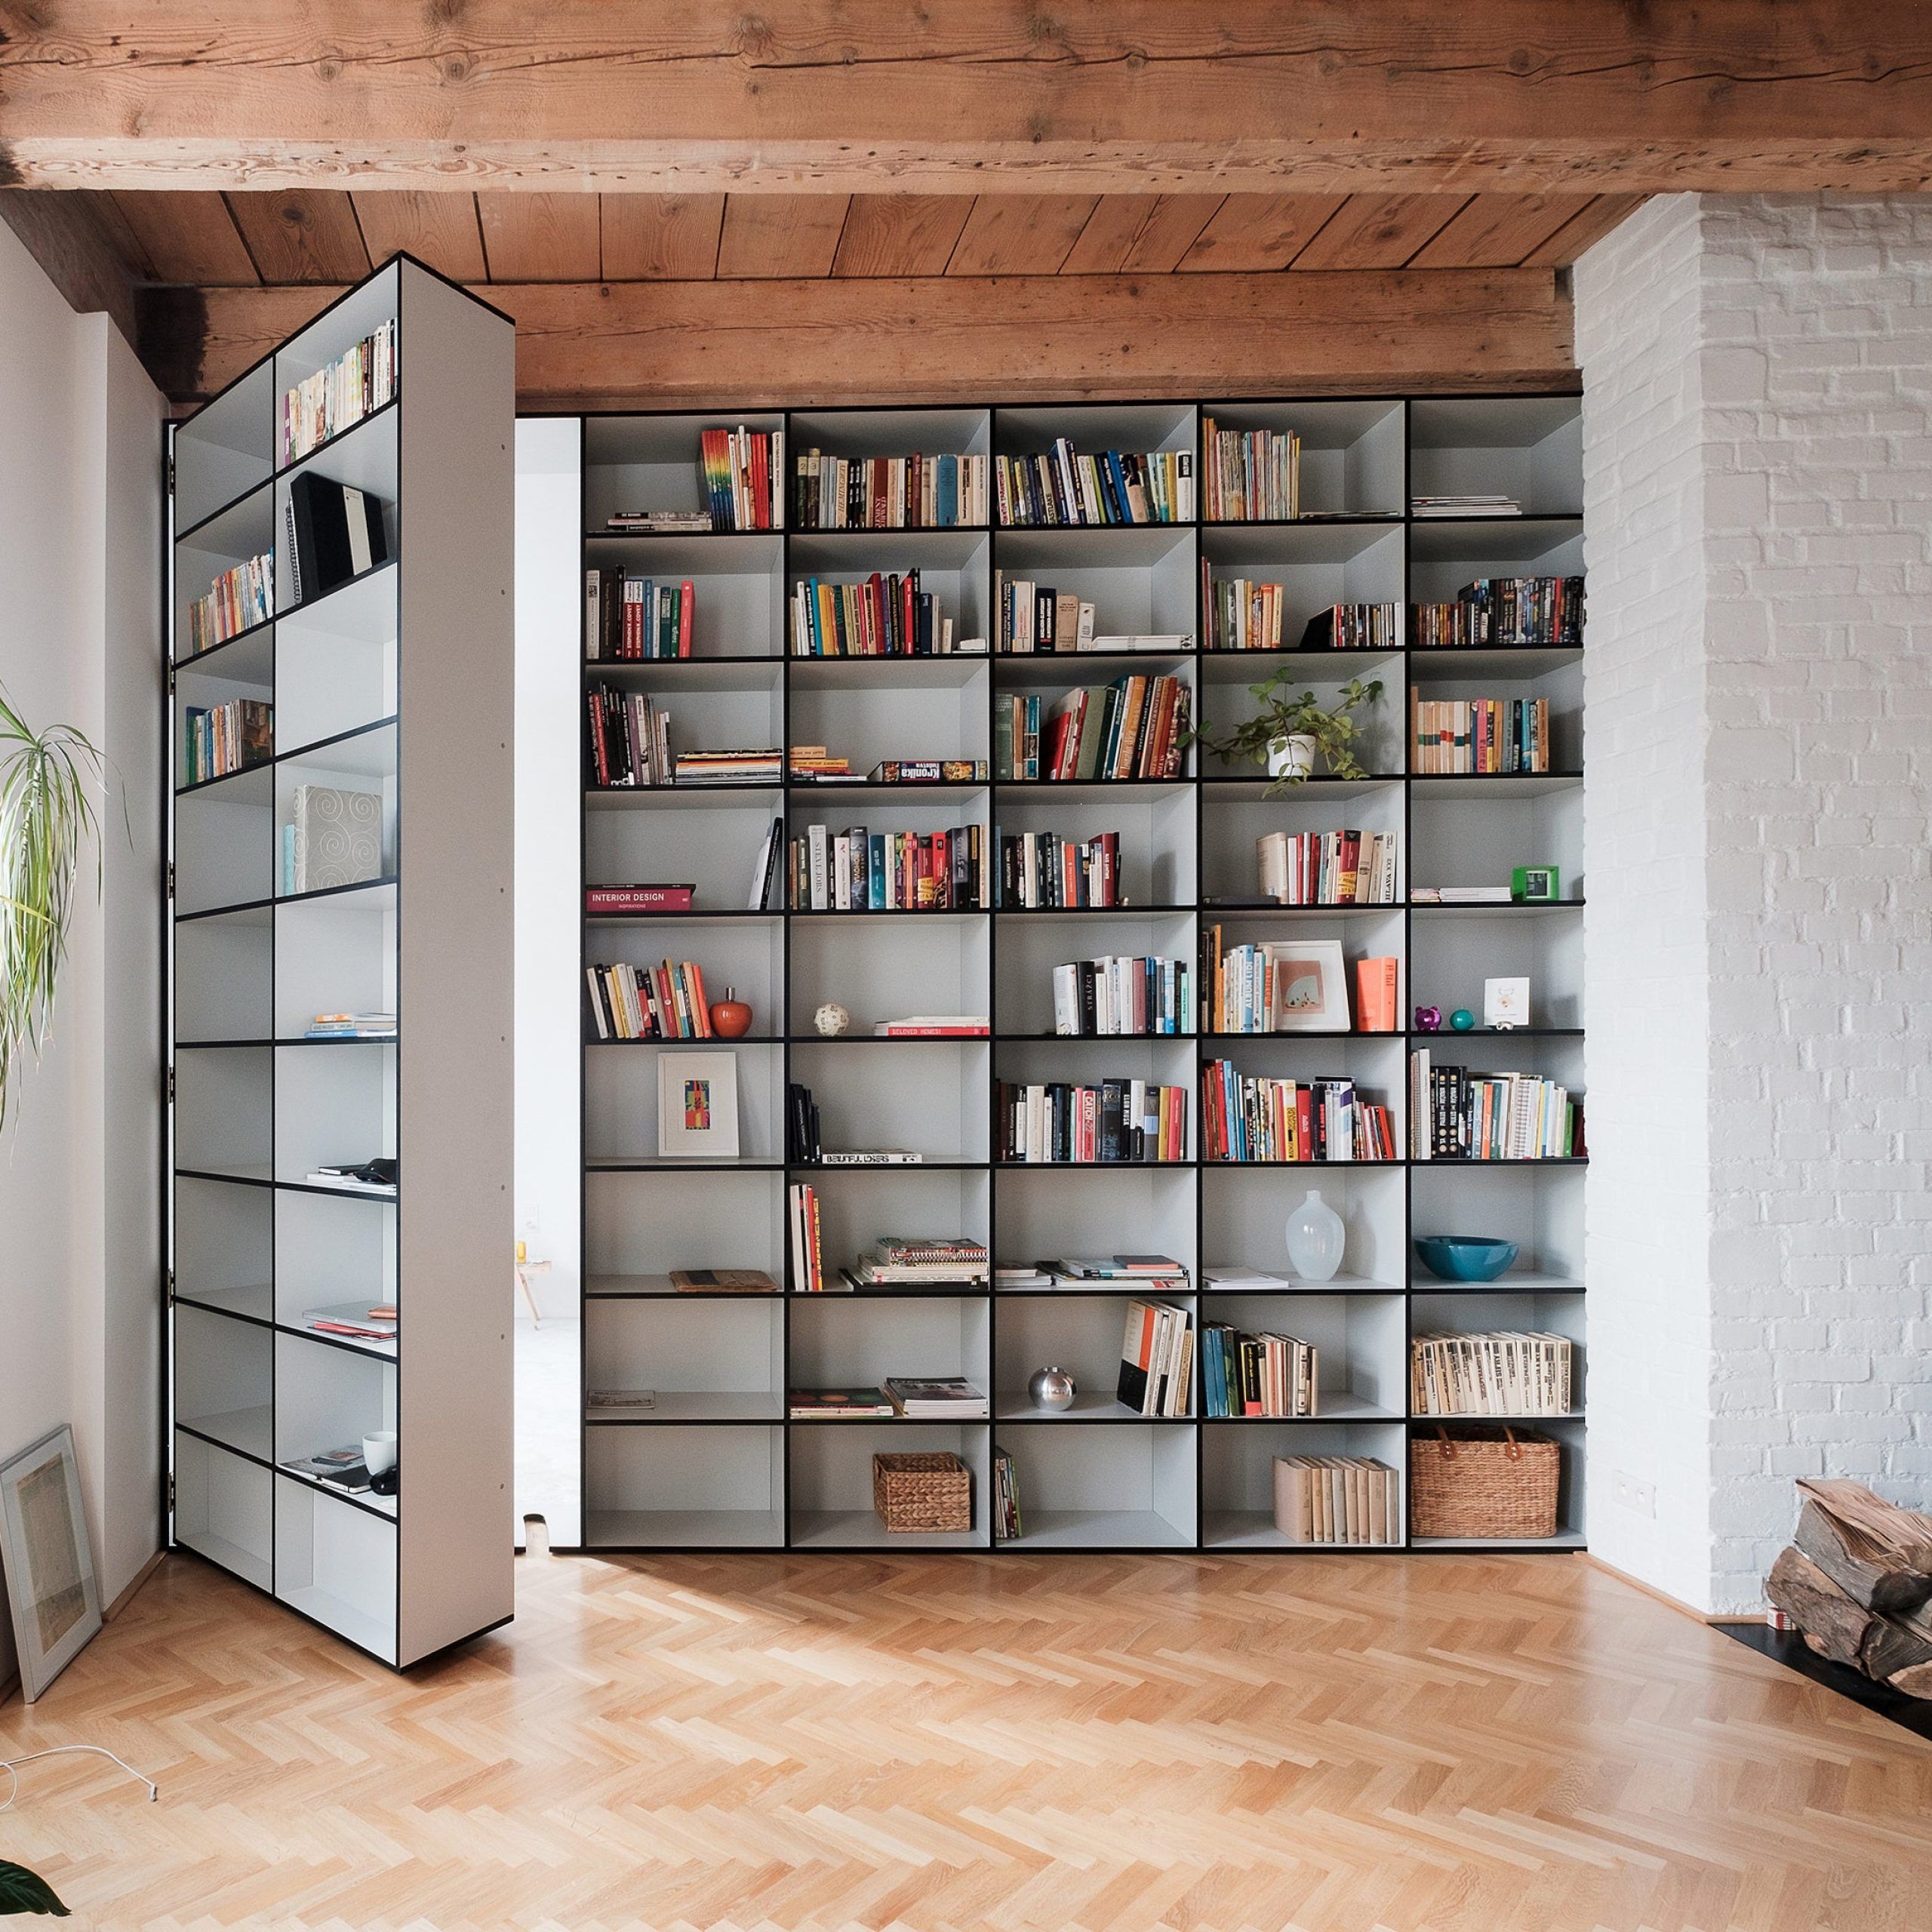 6 Amazing Bookcases With Doors That Belong On Your Pinterest Board Pertaining To Bookcases With Doors (View 9 of 15)